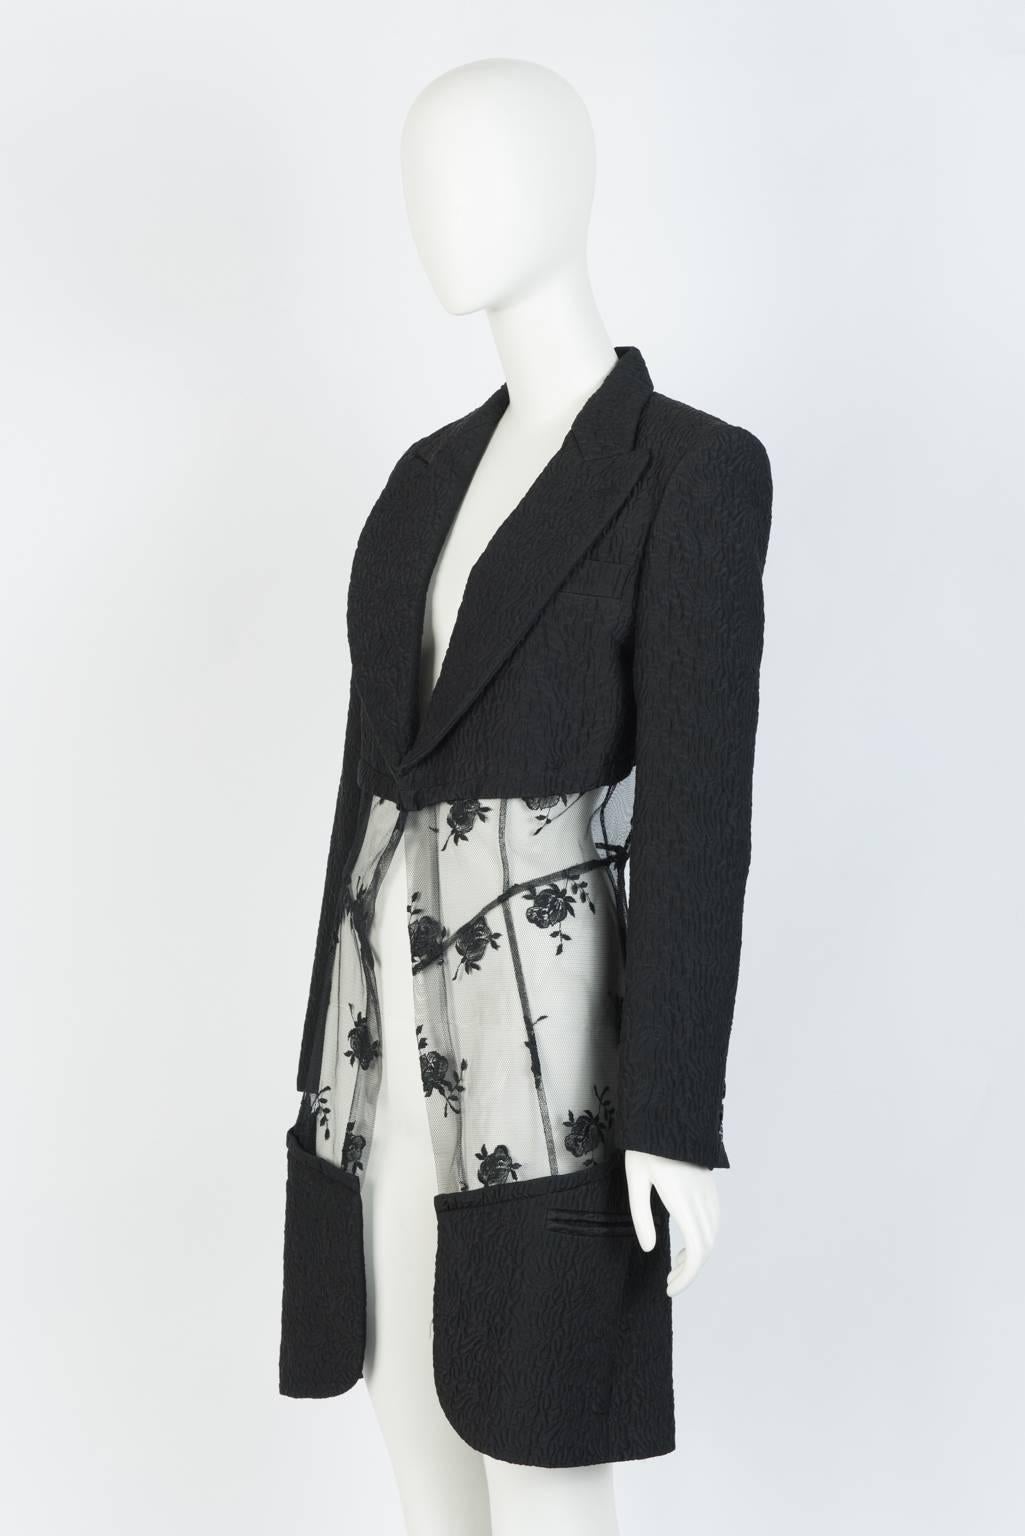 Fitted blazer coat in embroidered silk with peak lapels, slash pockets, 3 button cuffs, and sheer panel of rose-patterned mesh. 